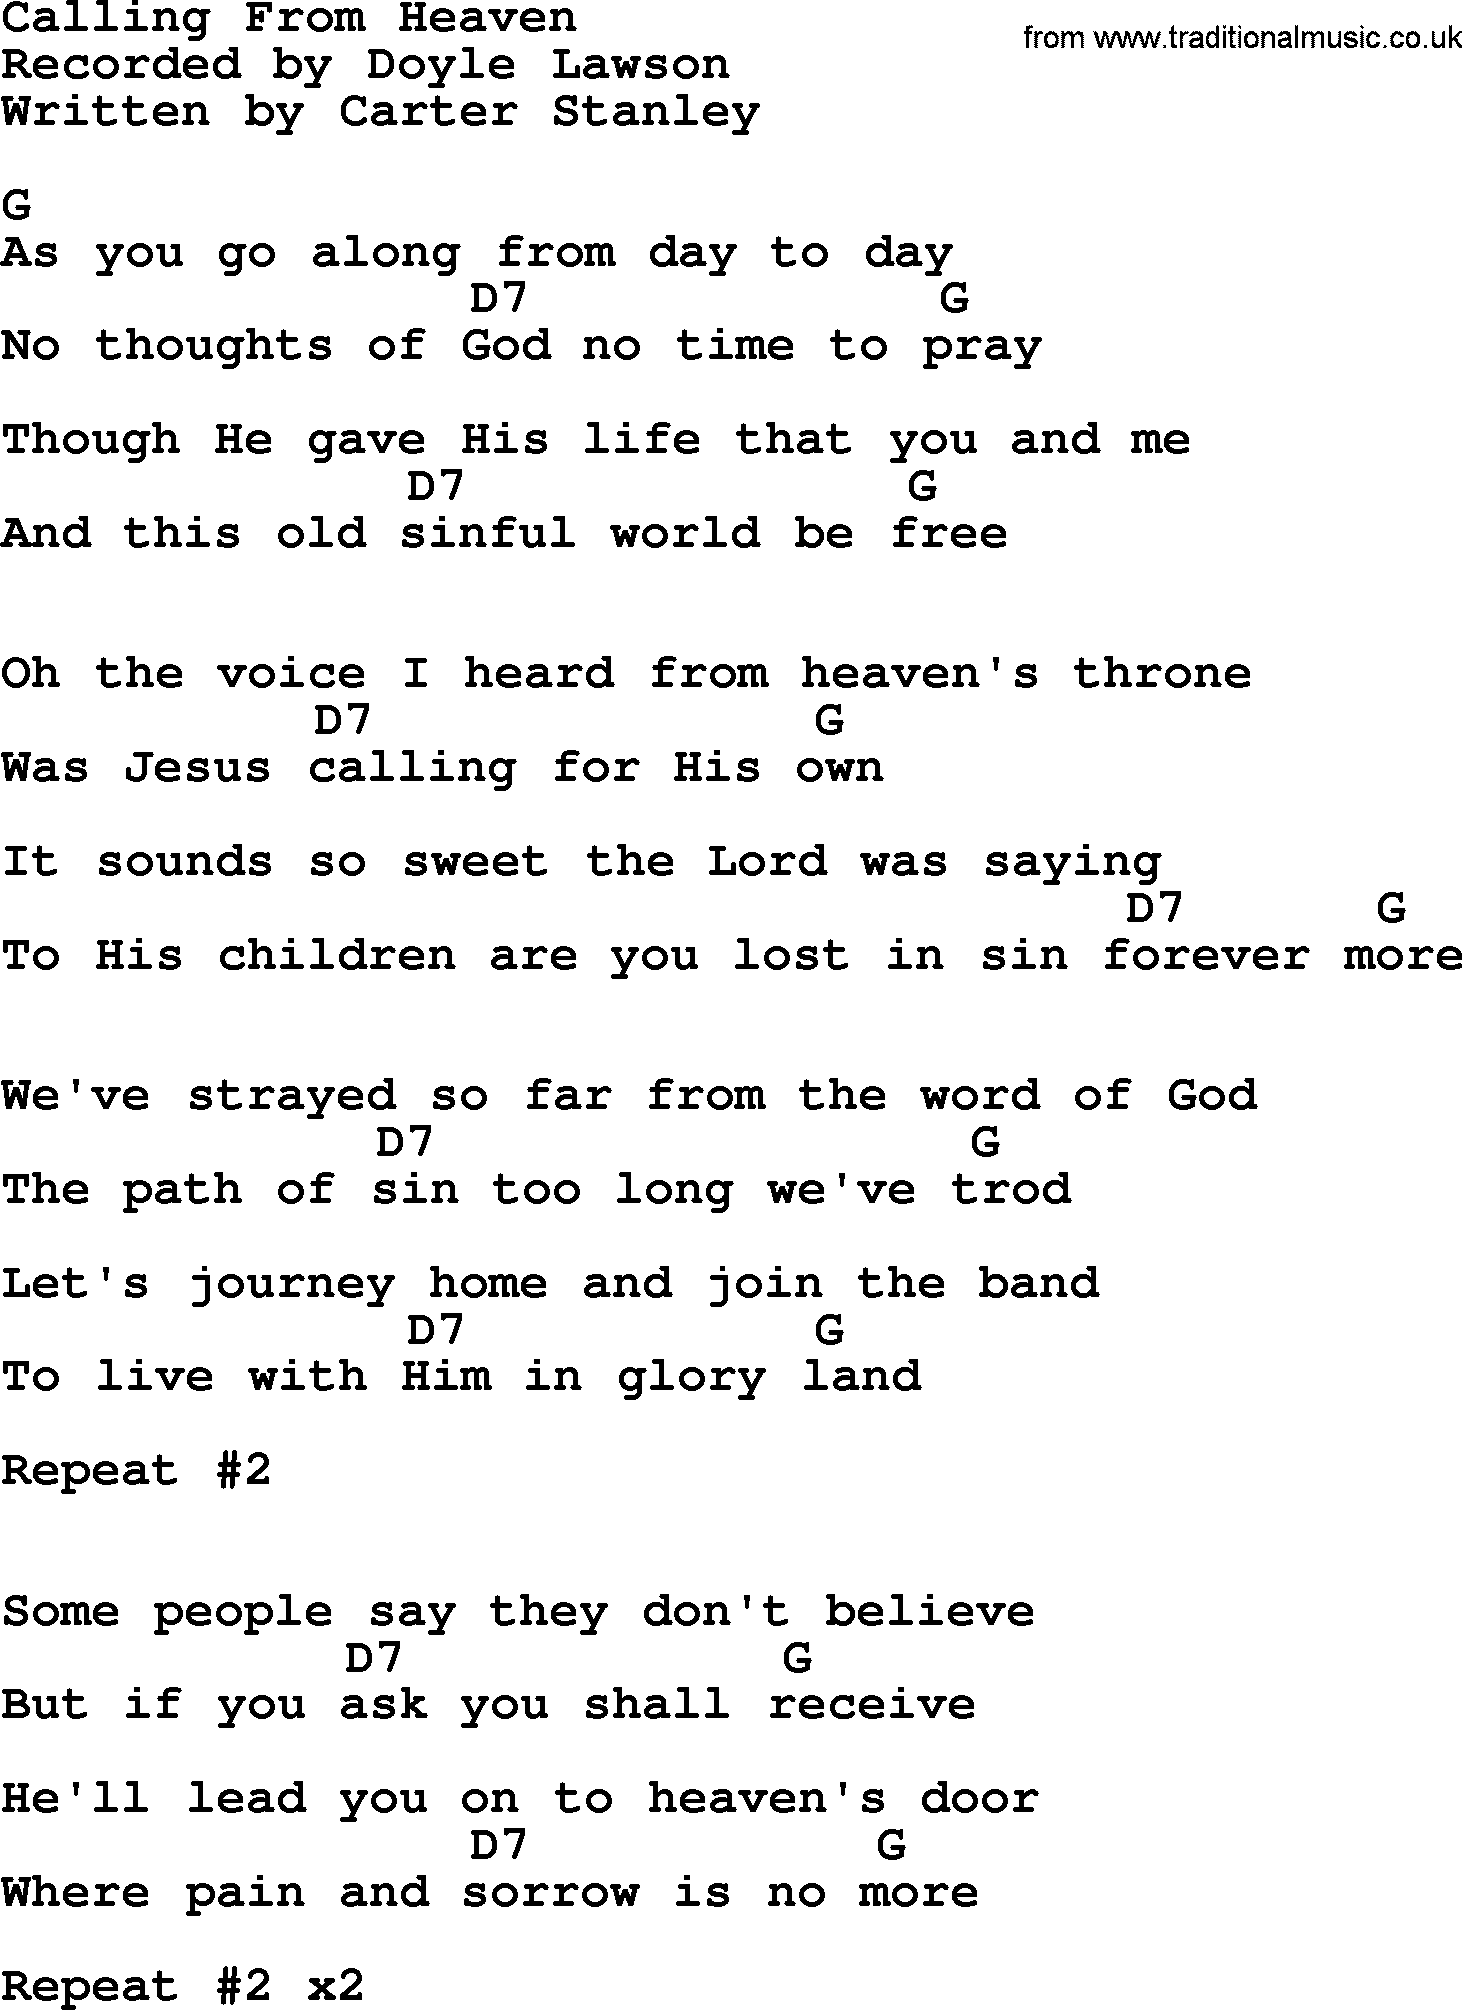 Bluegrass song: Calling From Heaven, lyrics and chords